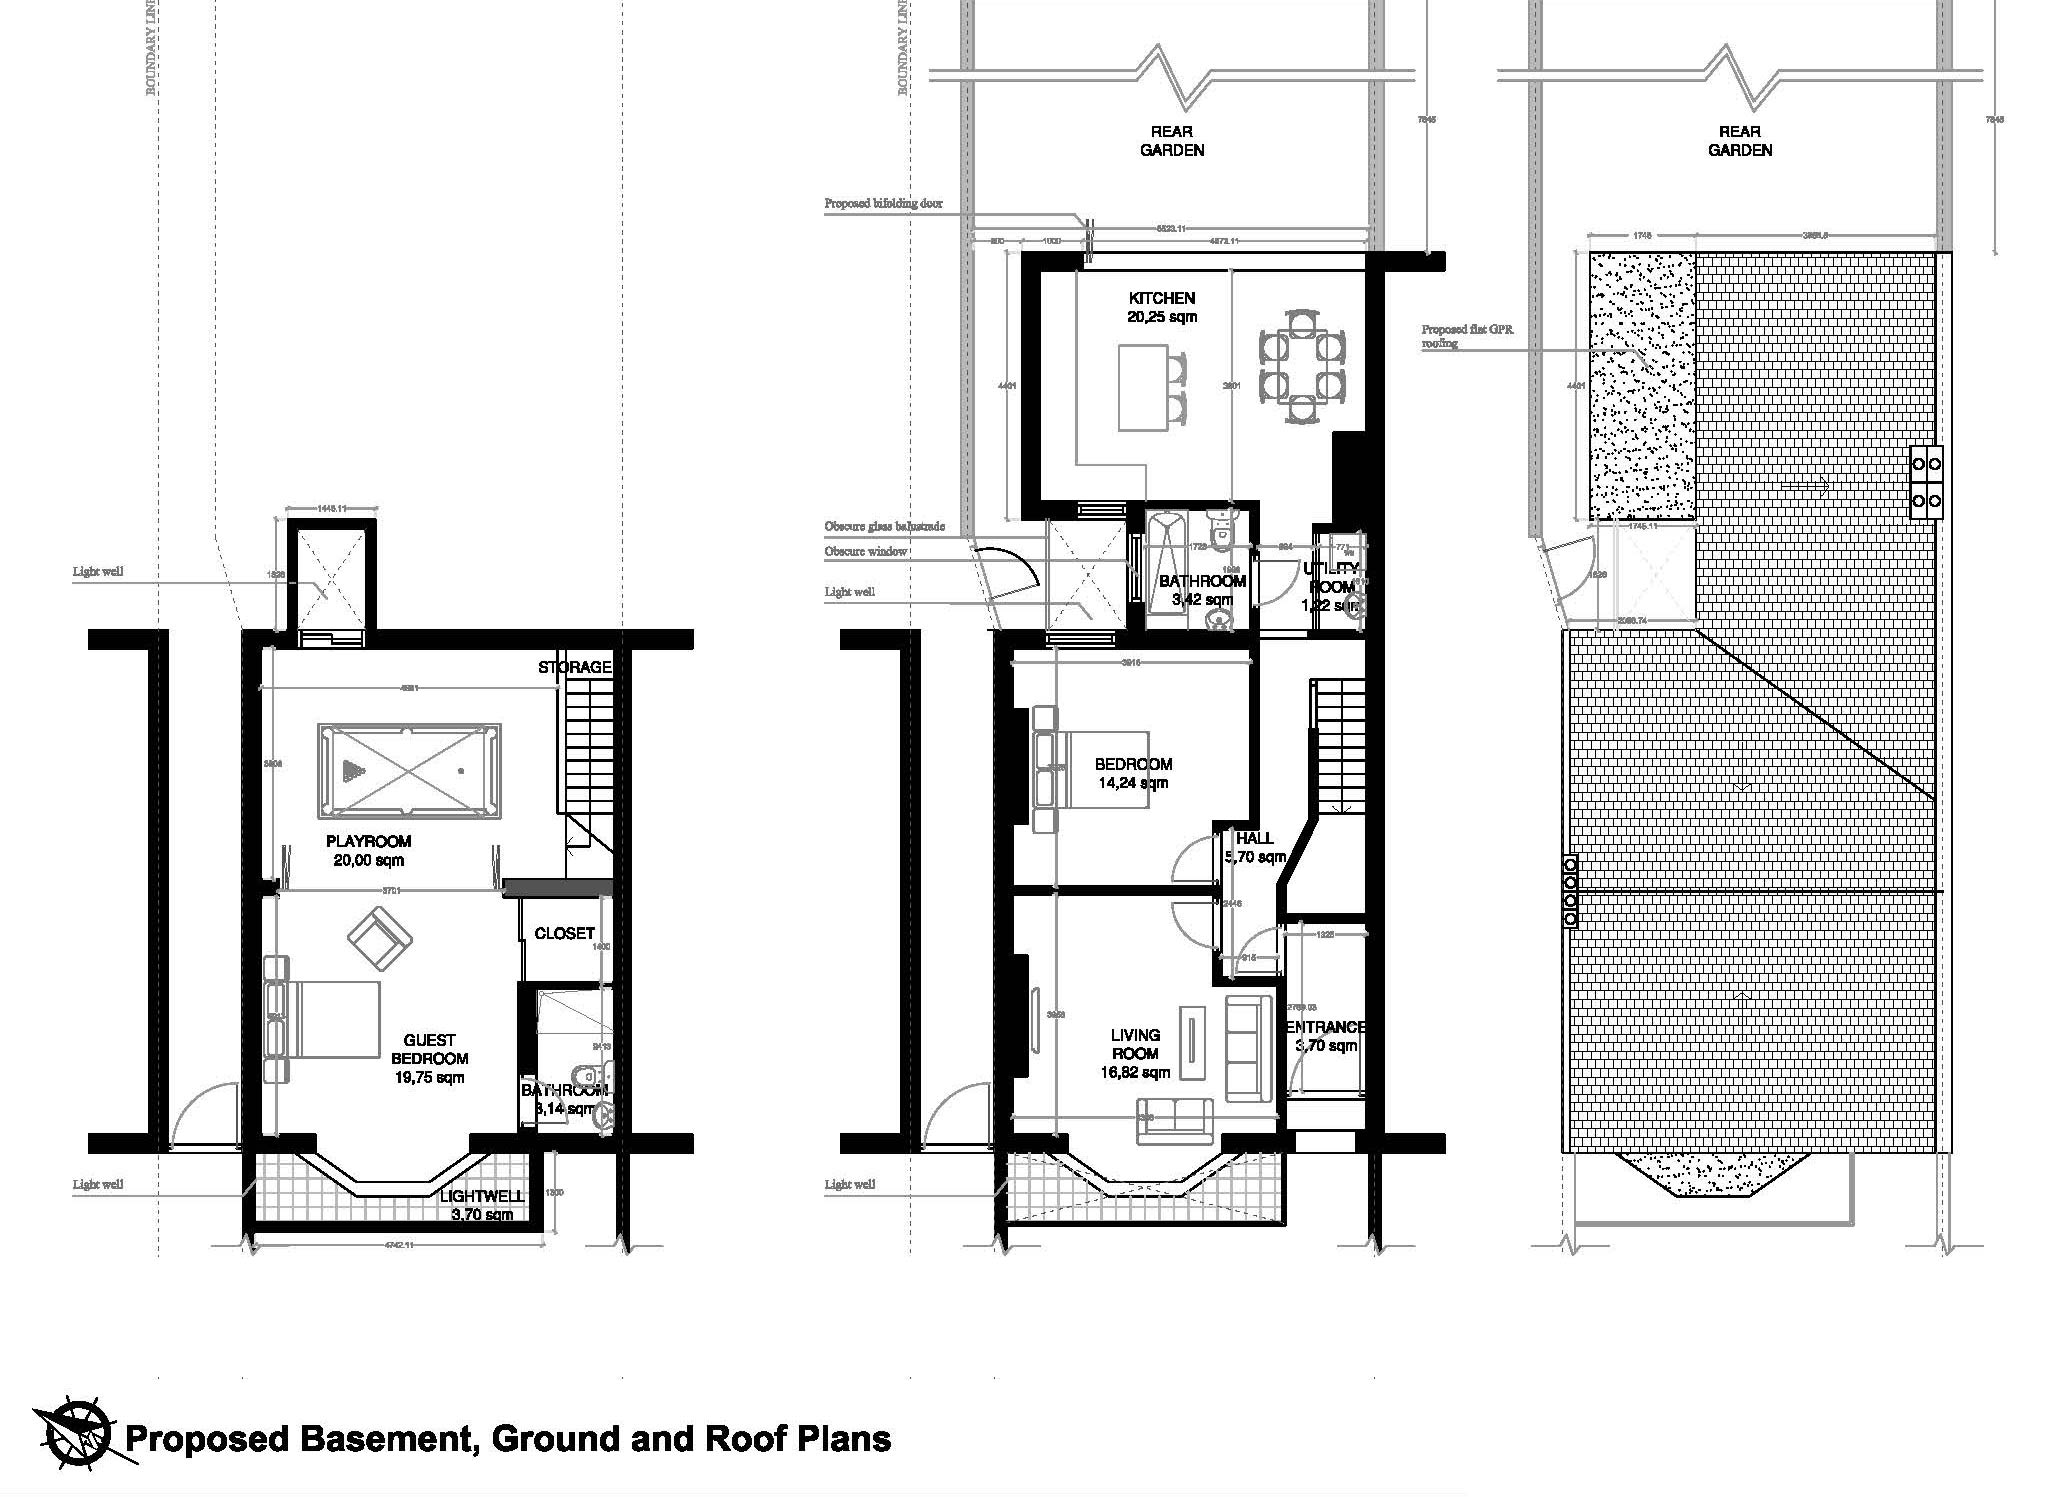 Wandsworth-council-proposed-basement-ground-floor,-roof-proposal-2